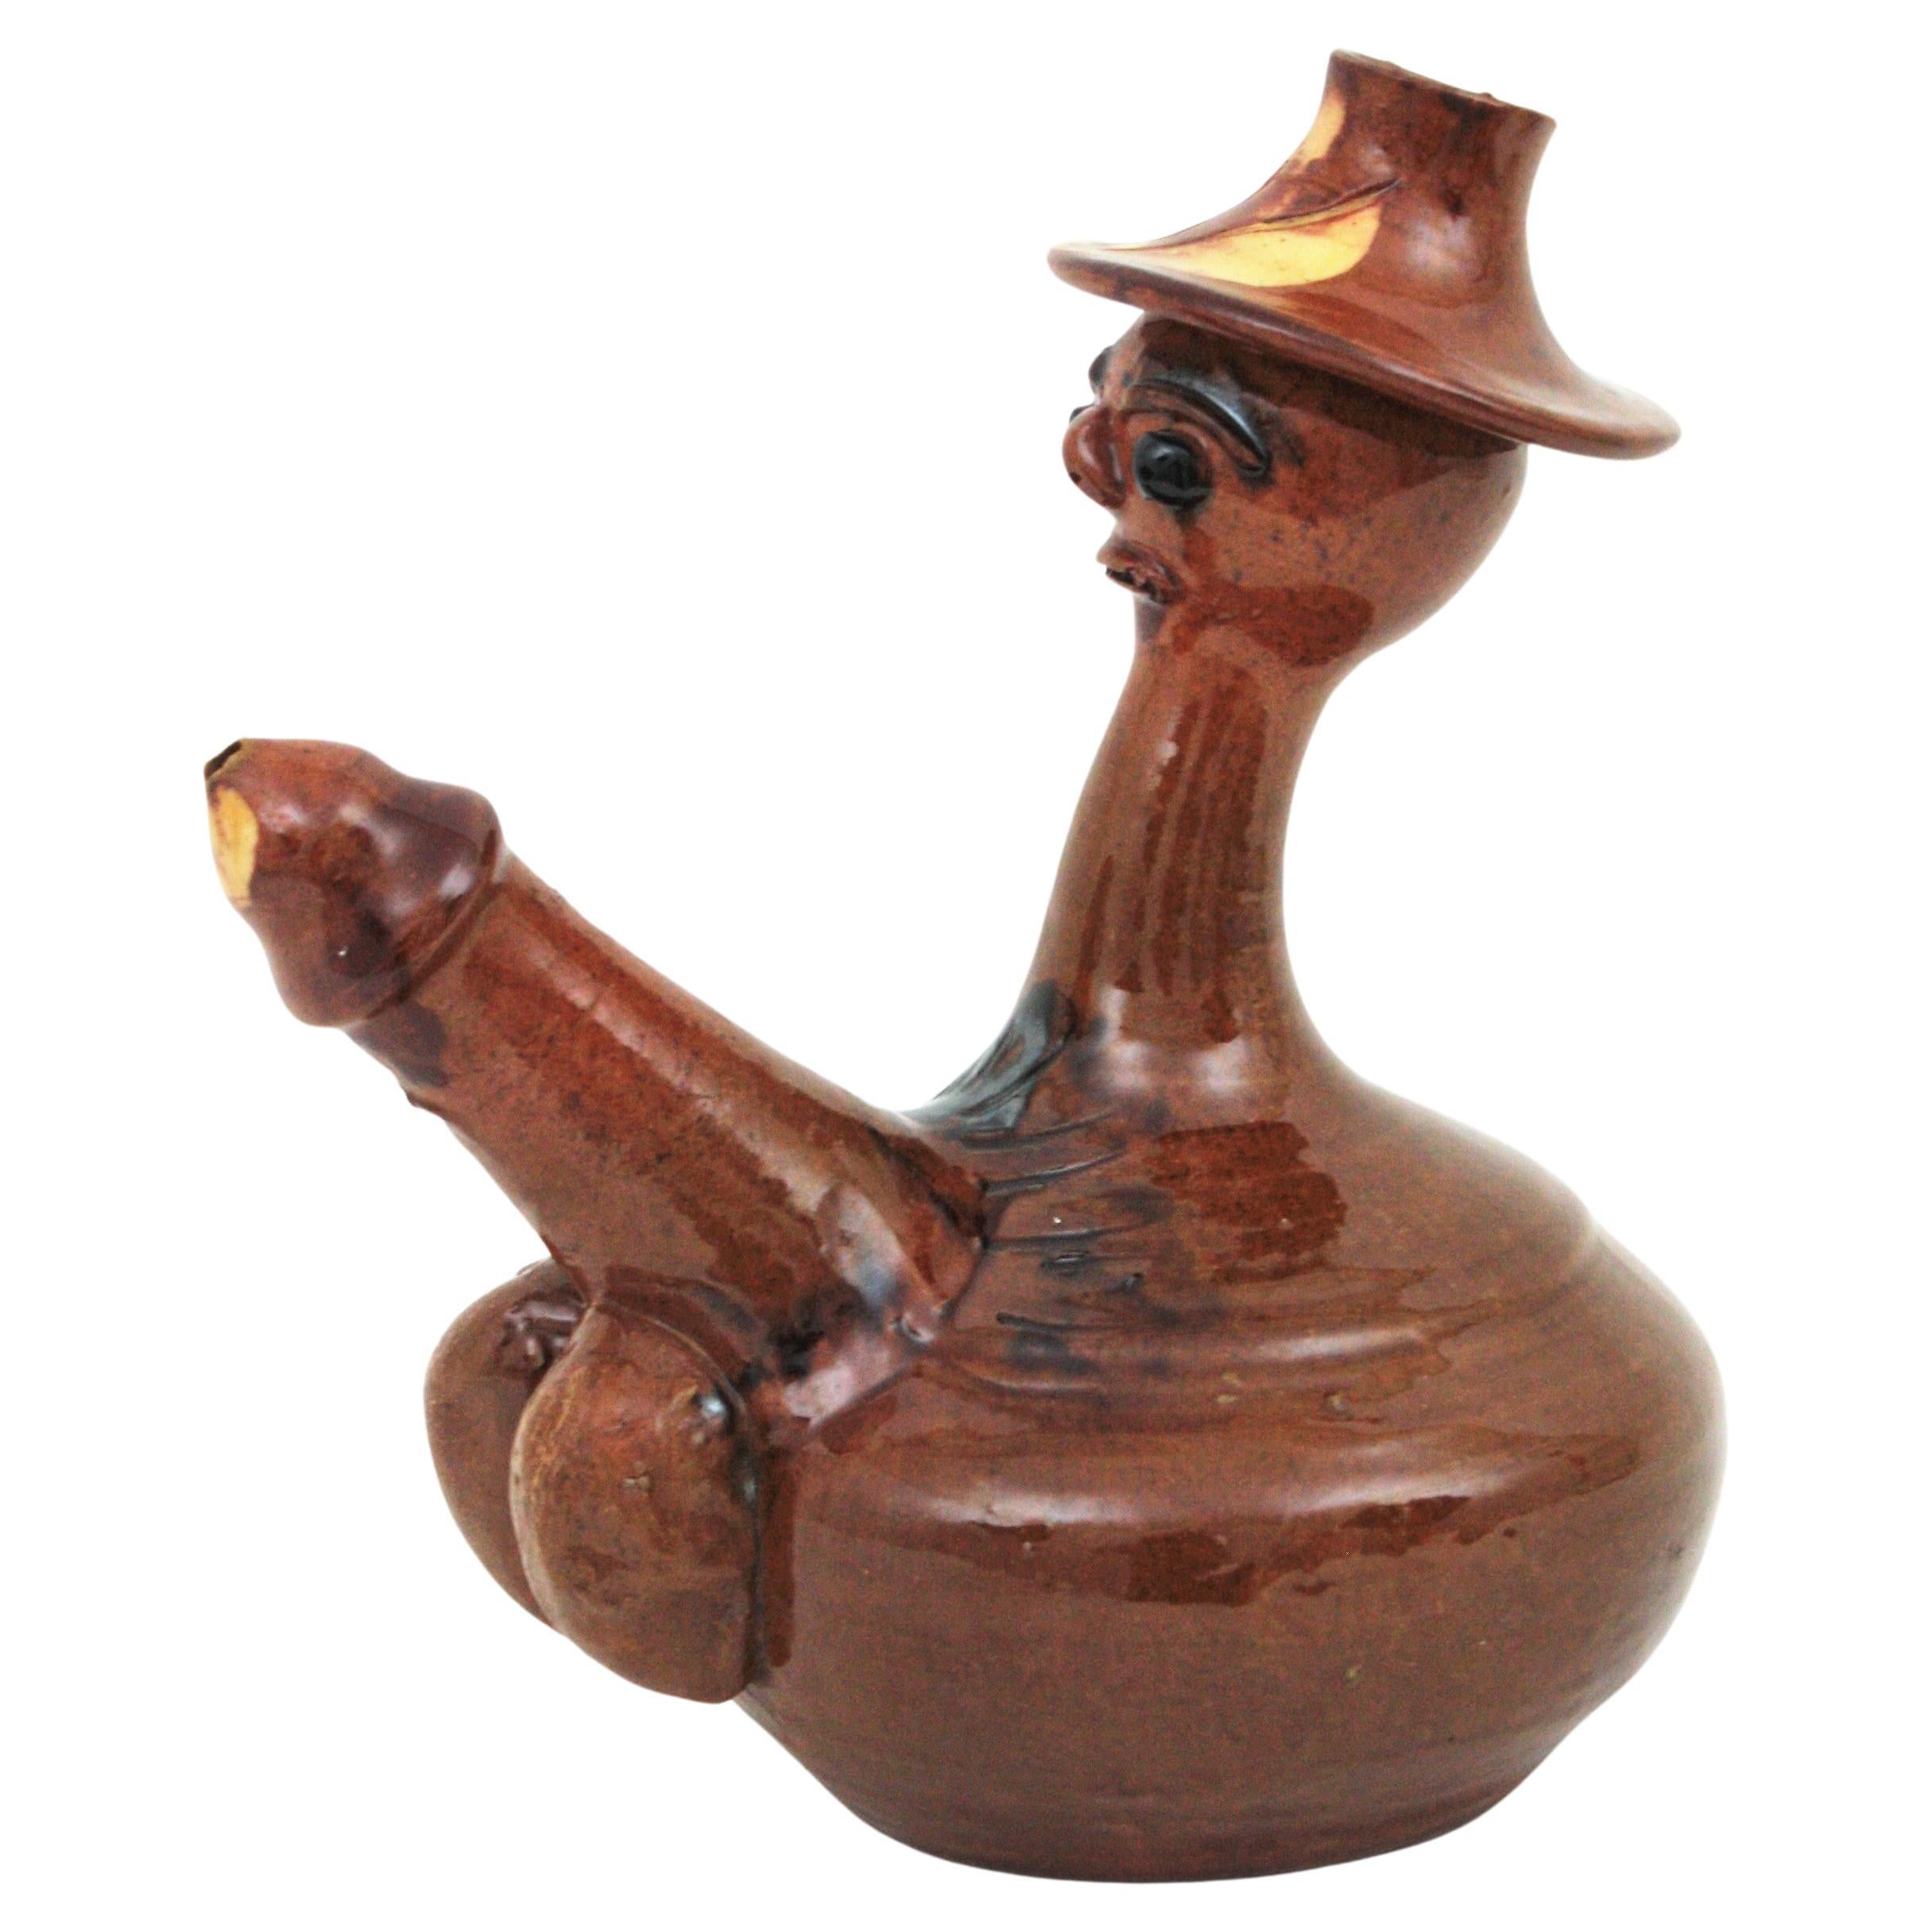 Handcrafted glazed terracotta ceramic phallic pitcher, Spain, 1960s.
Jug form as a man with an exaggerated phallus.
This traditional spanish jug is called 